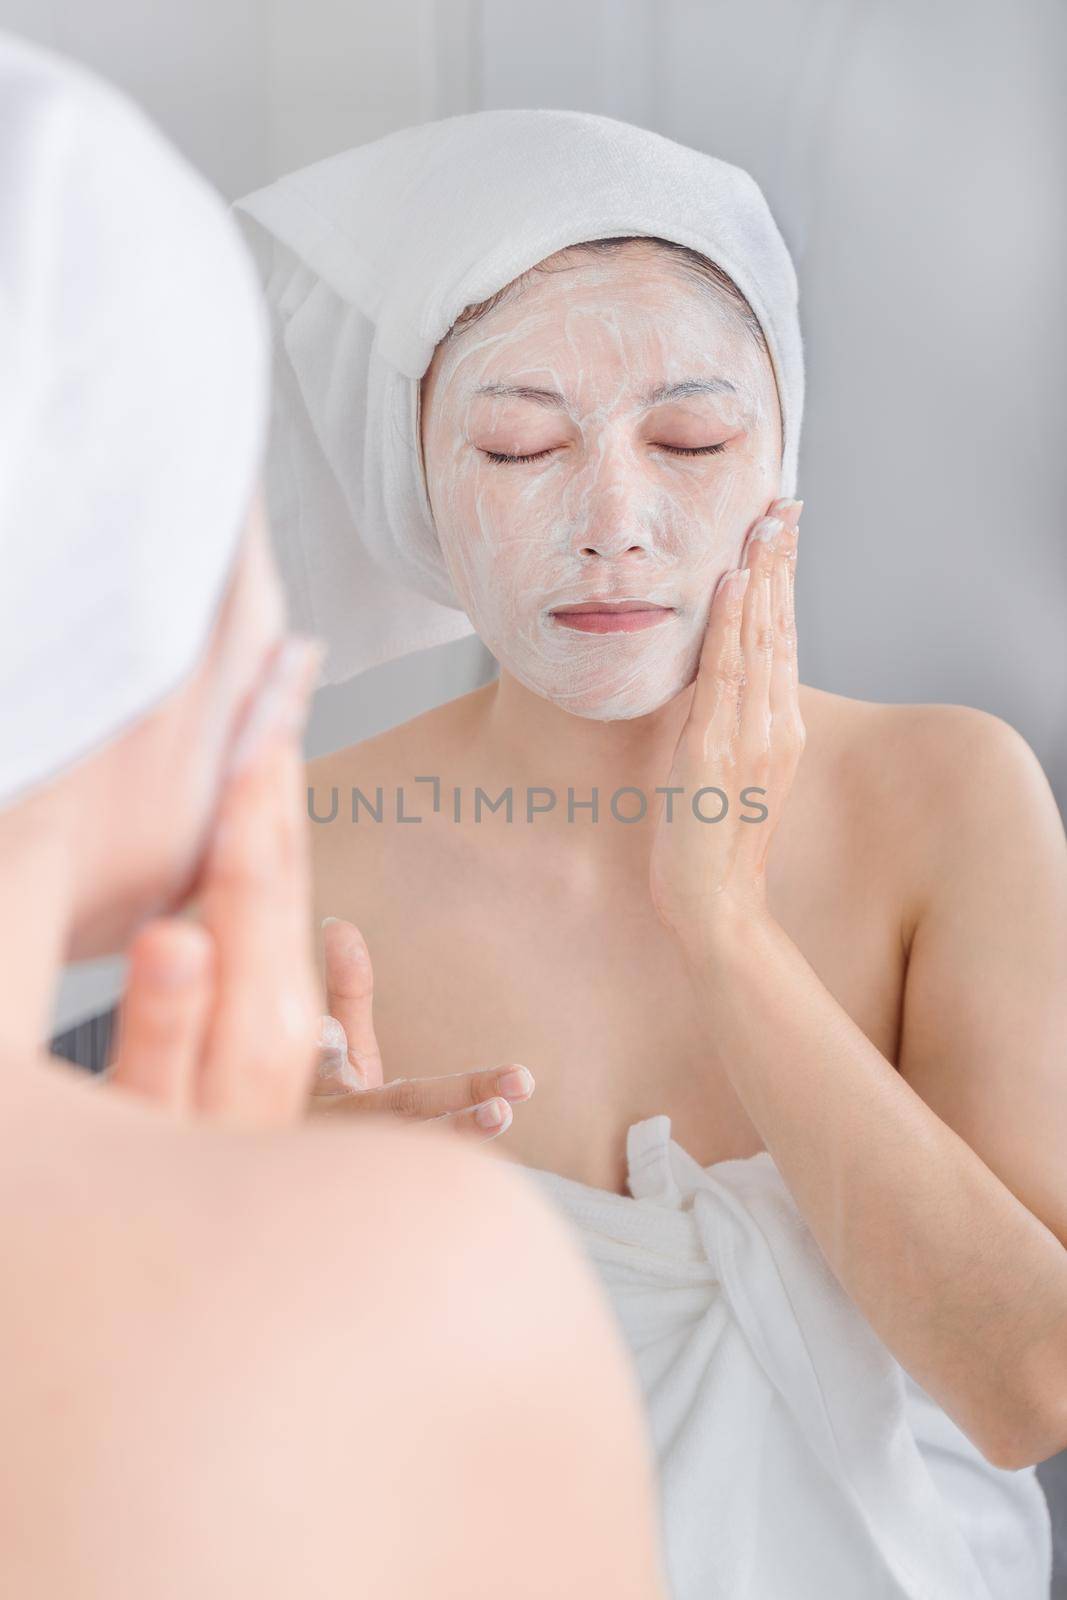 woman applying mask on her face and looking in the mirror in the bathroom